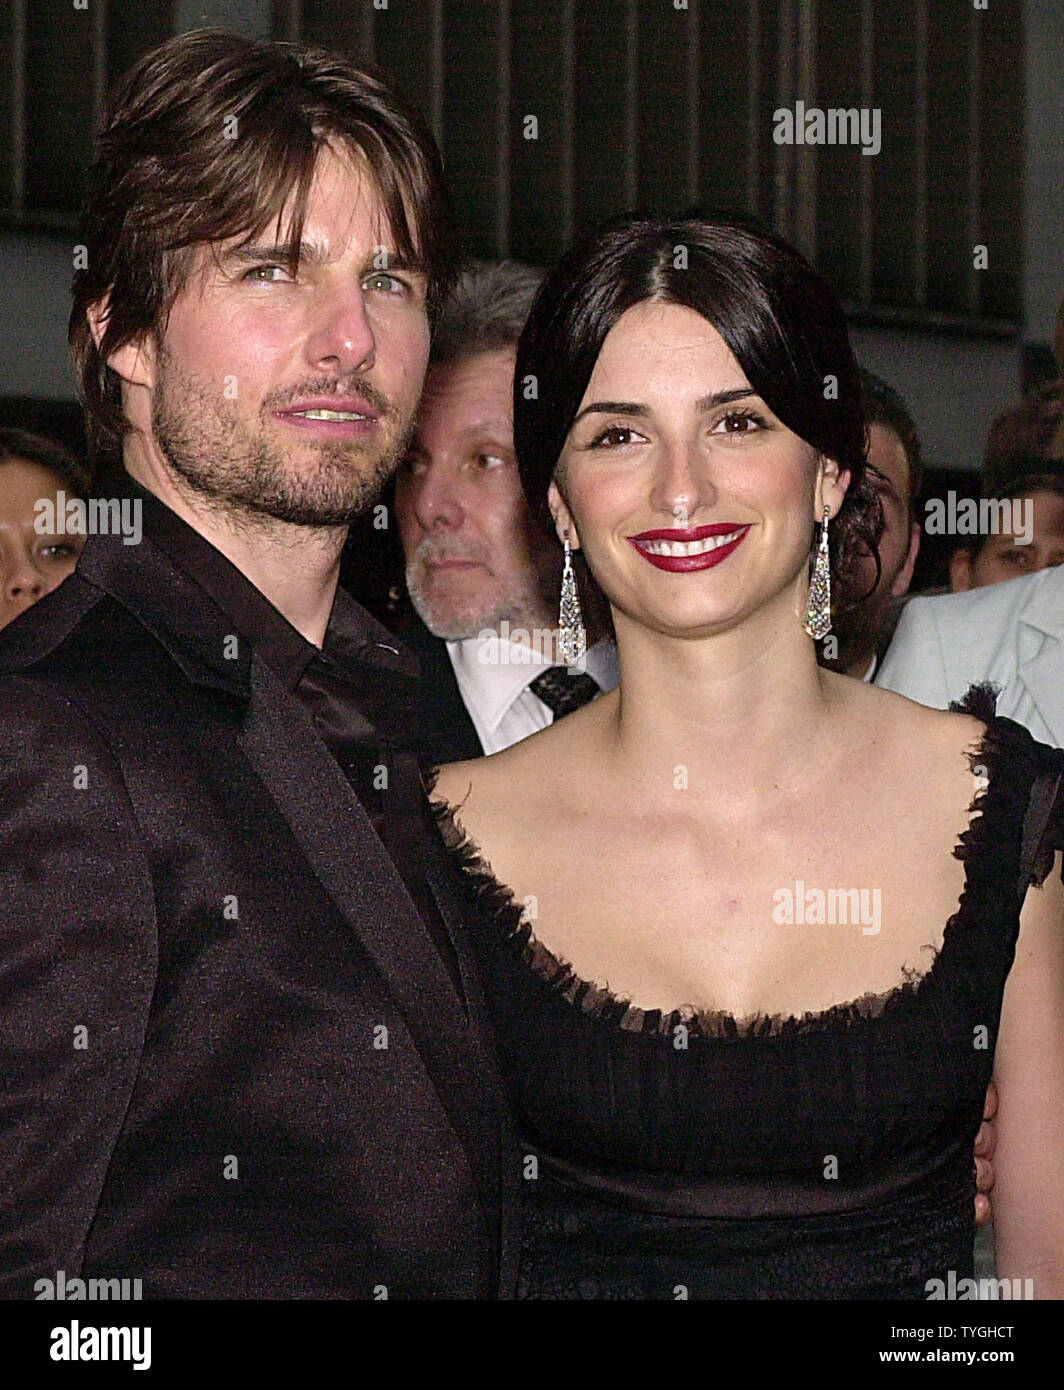 Actor Tom Cruise and girlfriend-actress Penelope Cruz shown in June 2002  announced through their publicist